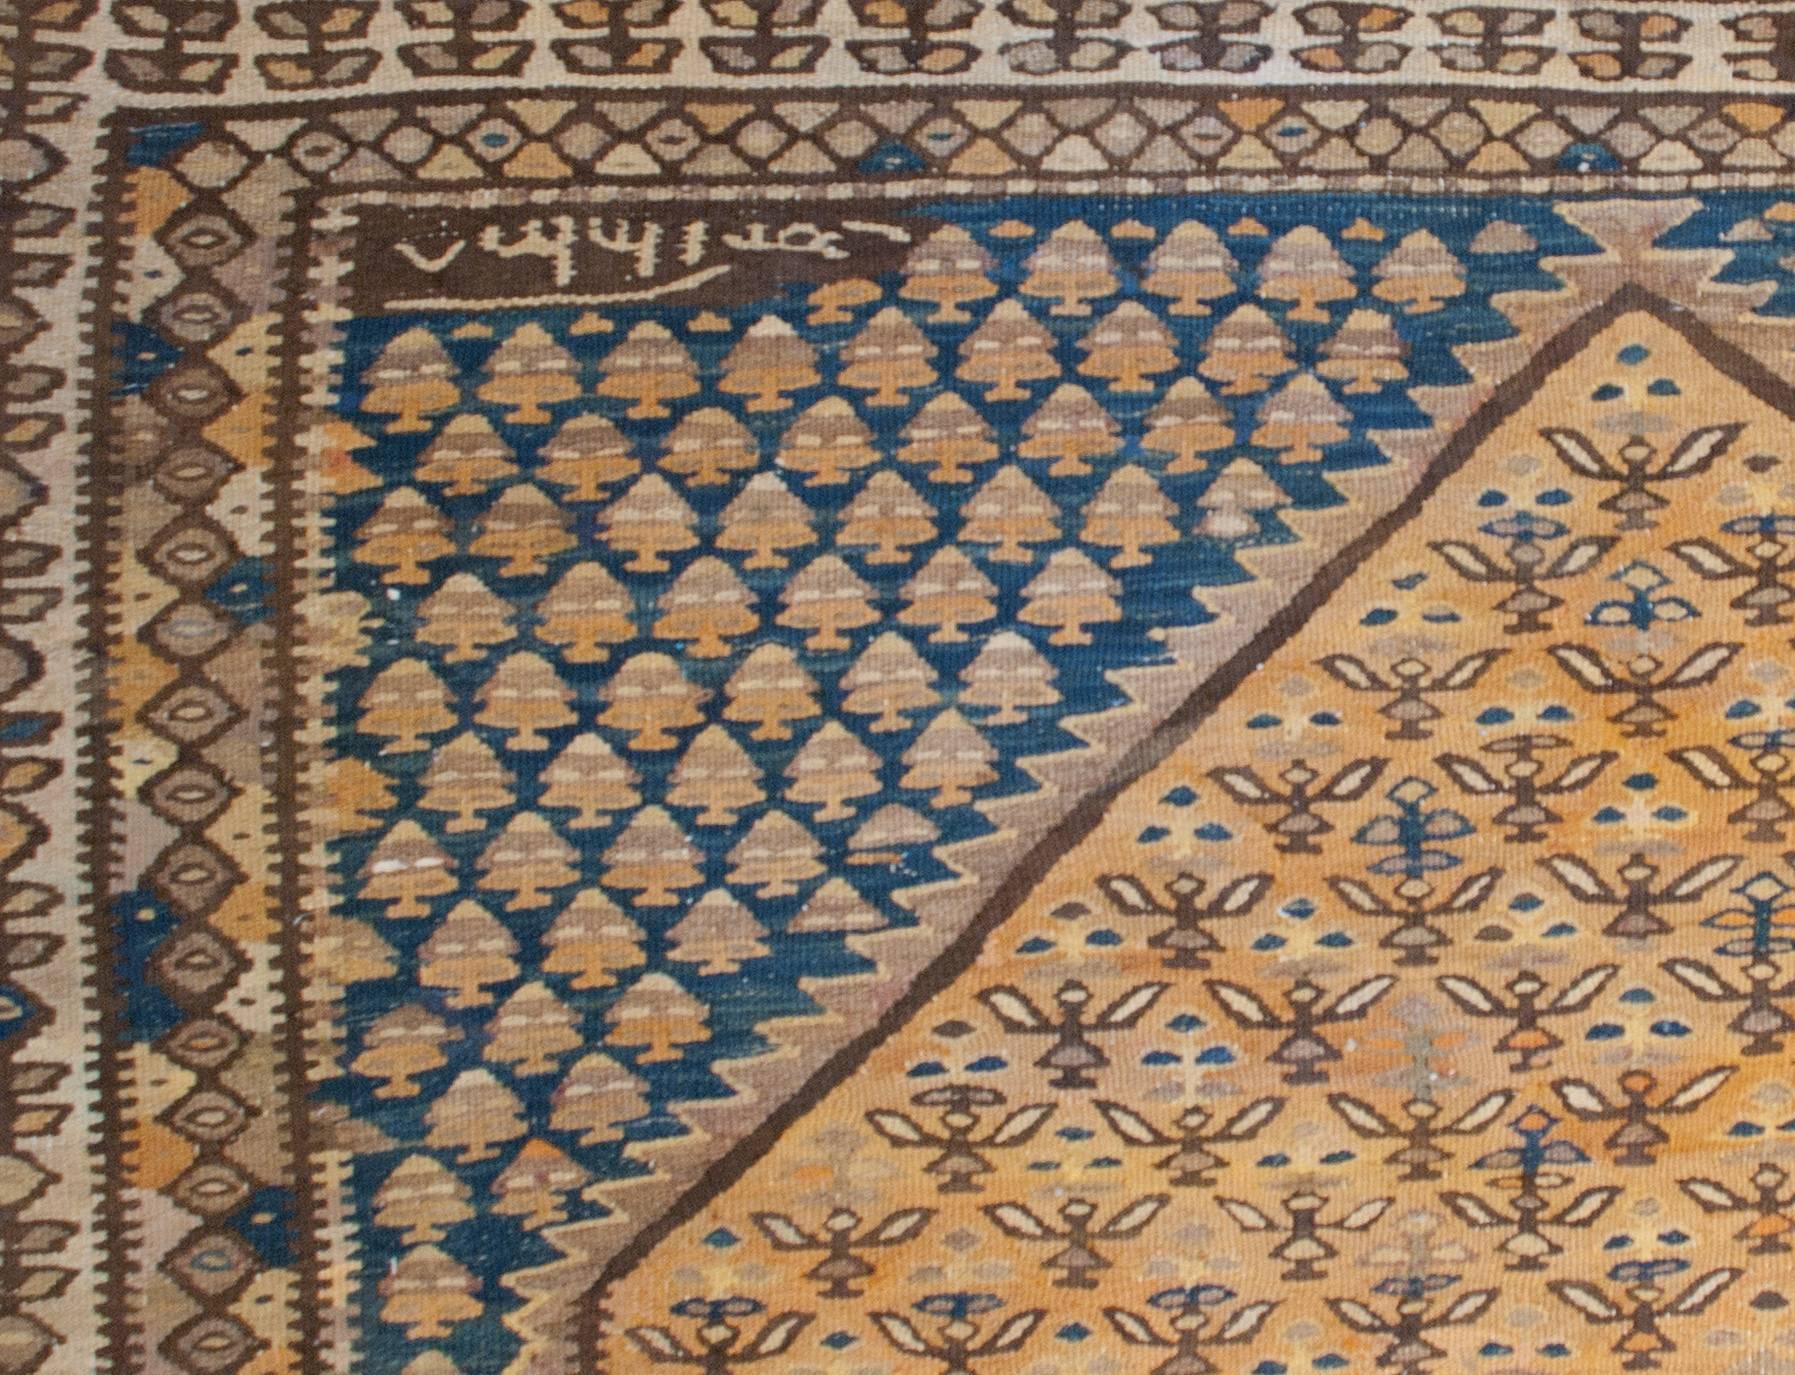 A wonderful early 20th century Persian Senneh kilim runner with a beautiful indigo diamond medallion with gold and brown circular motifs and birds, on an intricately woven field of flowers on a complementary gold background.  The border is wide,